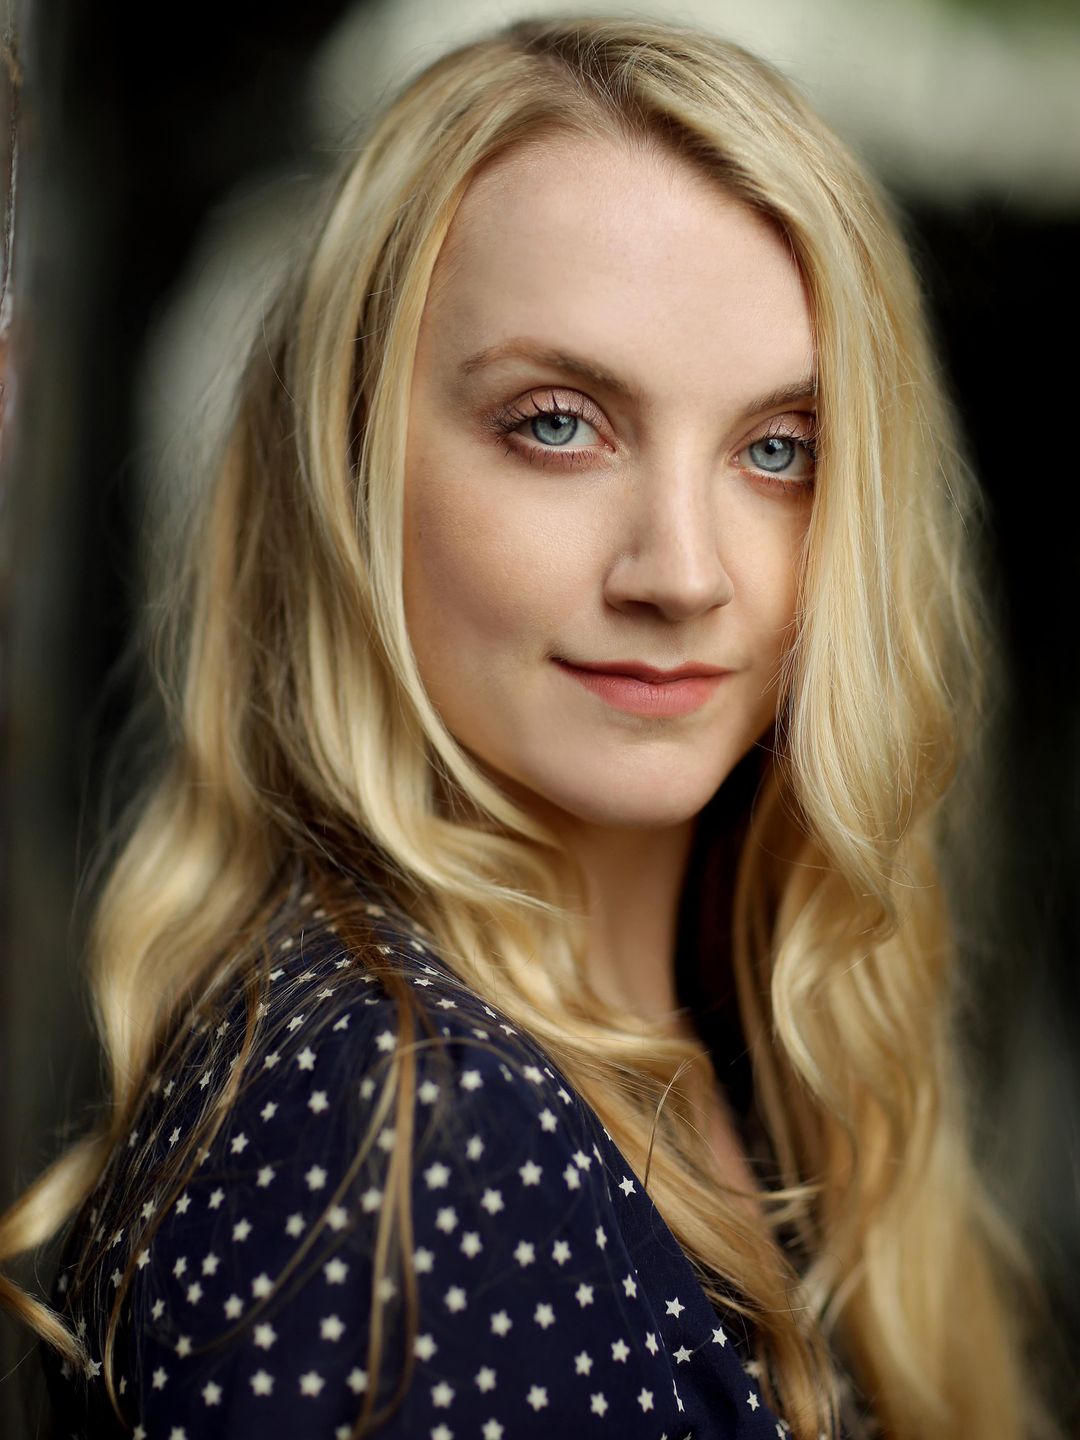 Evanna Lynch does she have kids